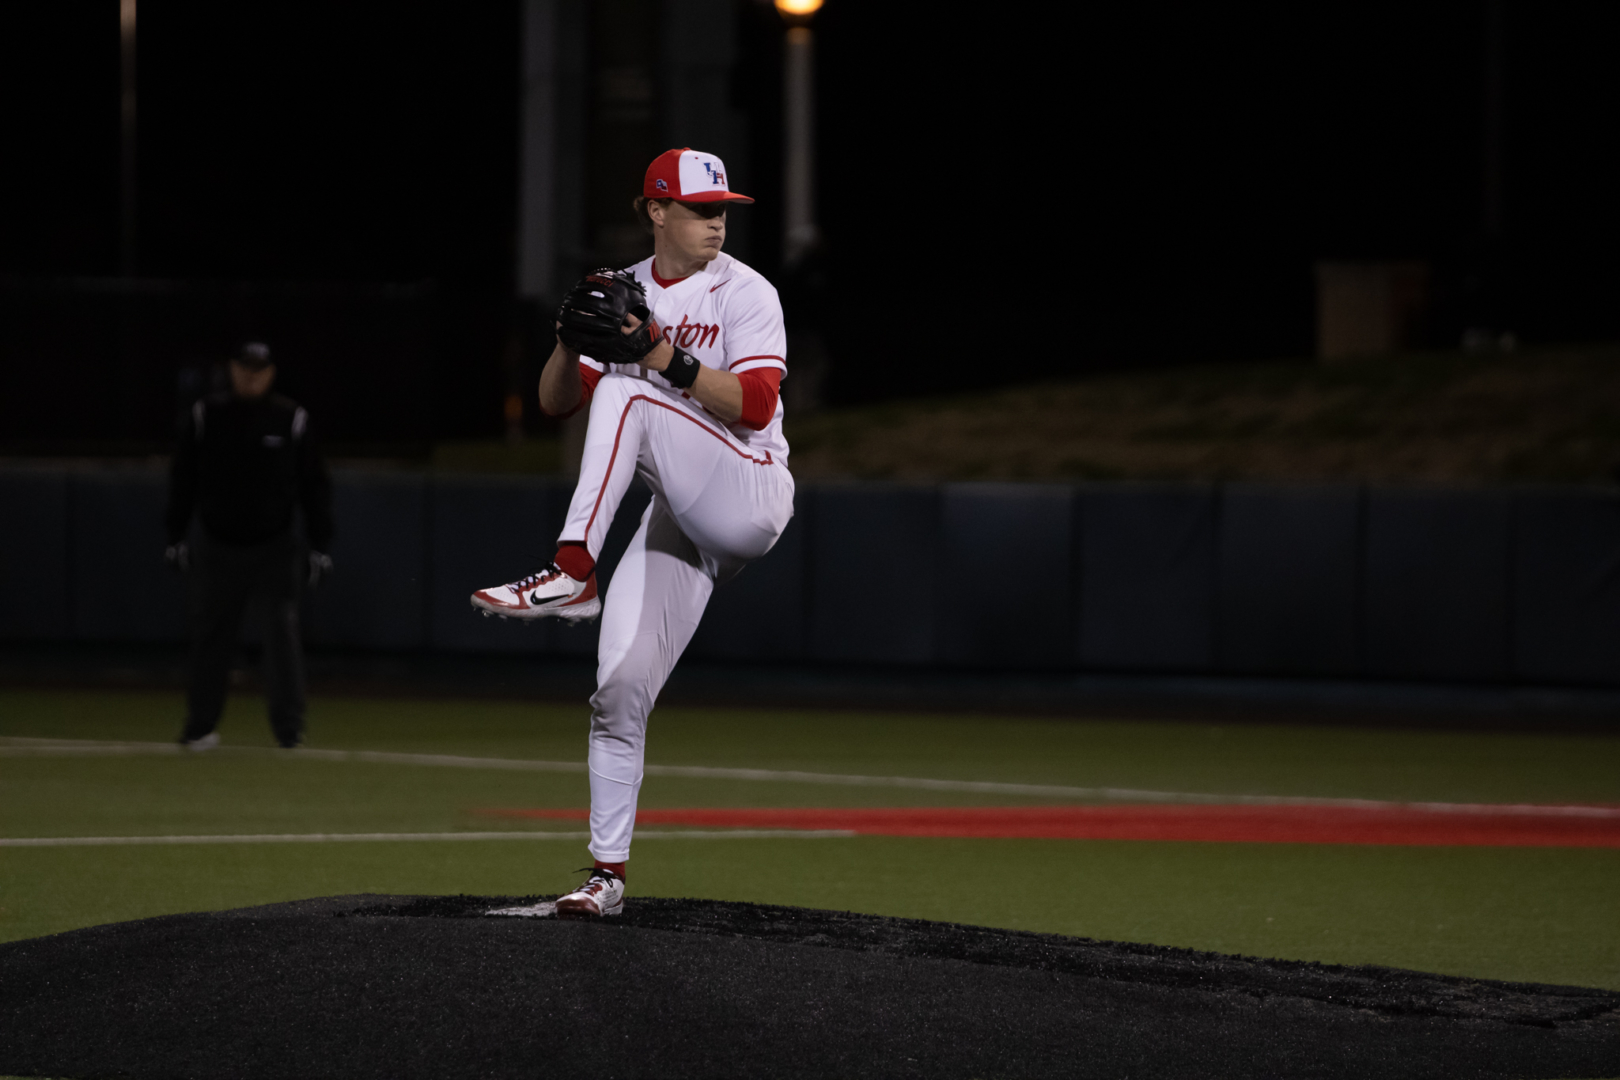 UH baseball went 1-2 in its three-game season-opening series against Cal over the weekend. | Raphael Fernandez/The Cougar